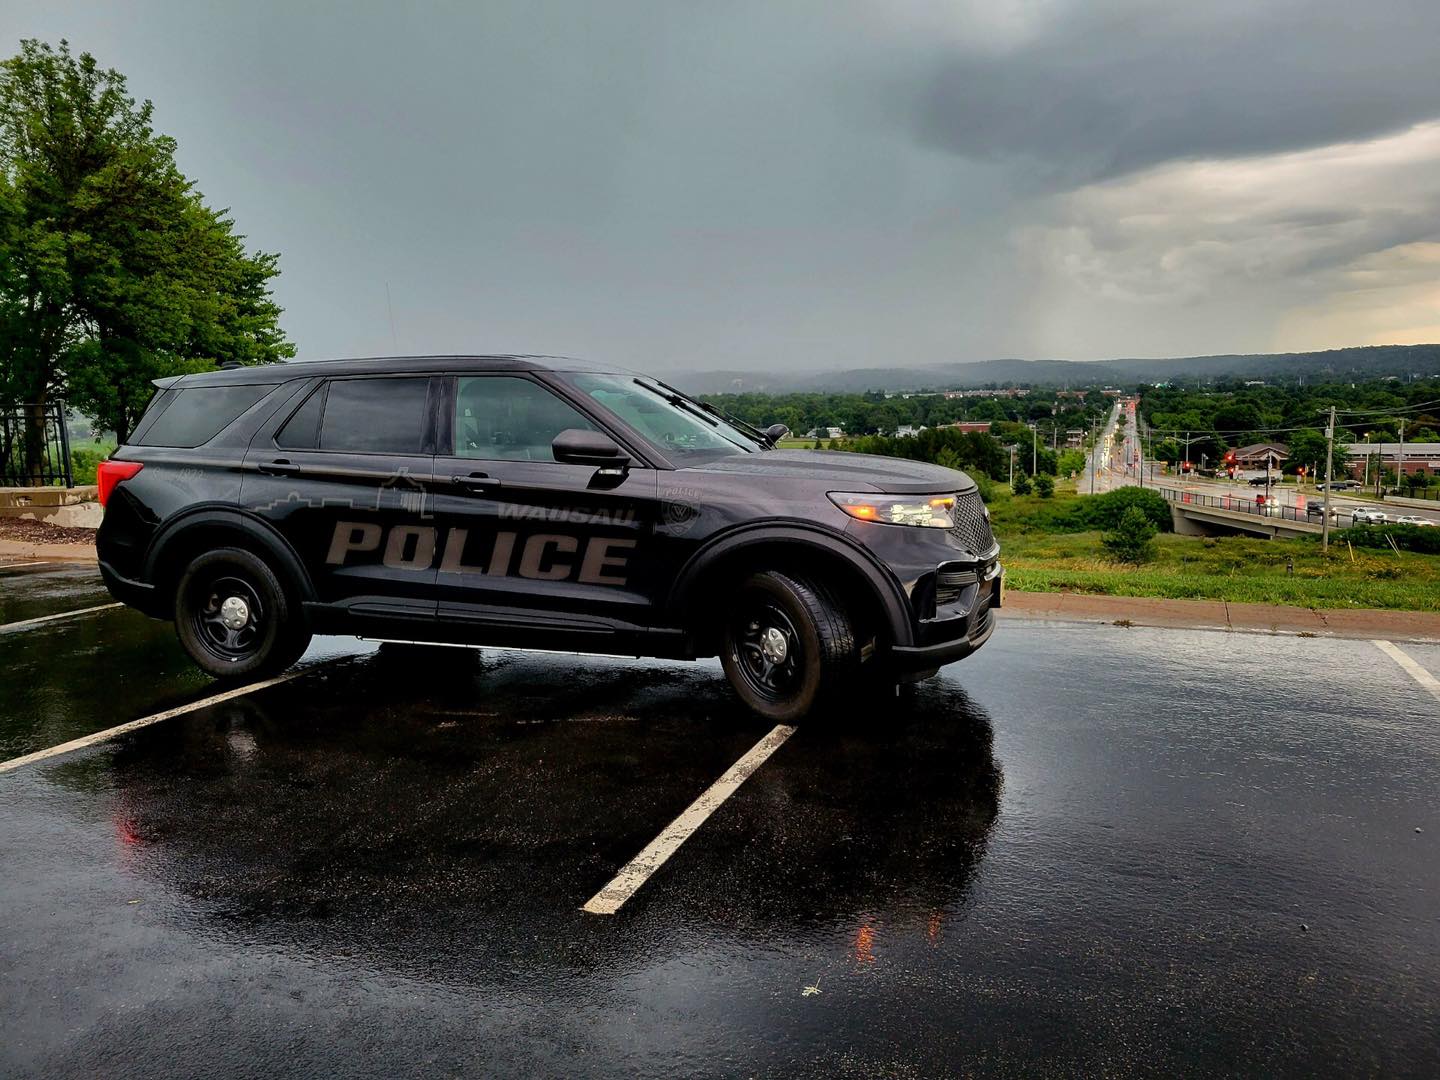 A Wausau Police vehicle parked in a parking lot